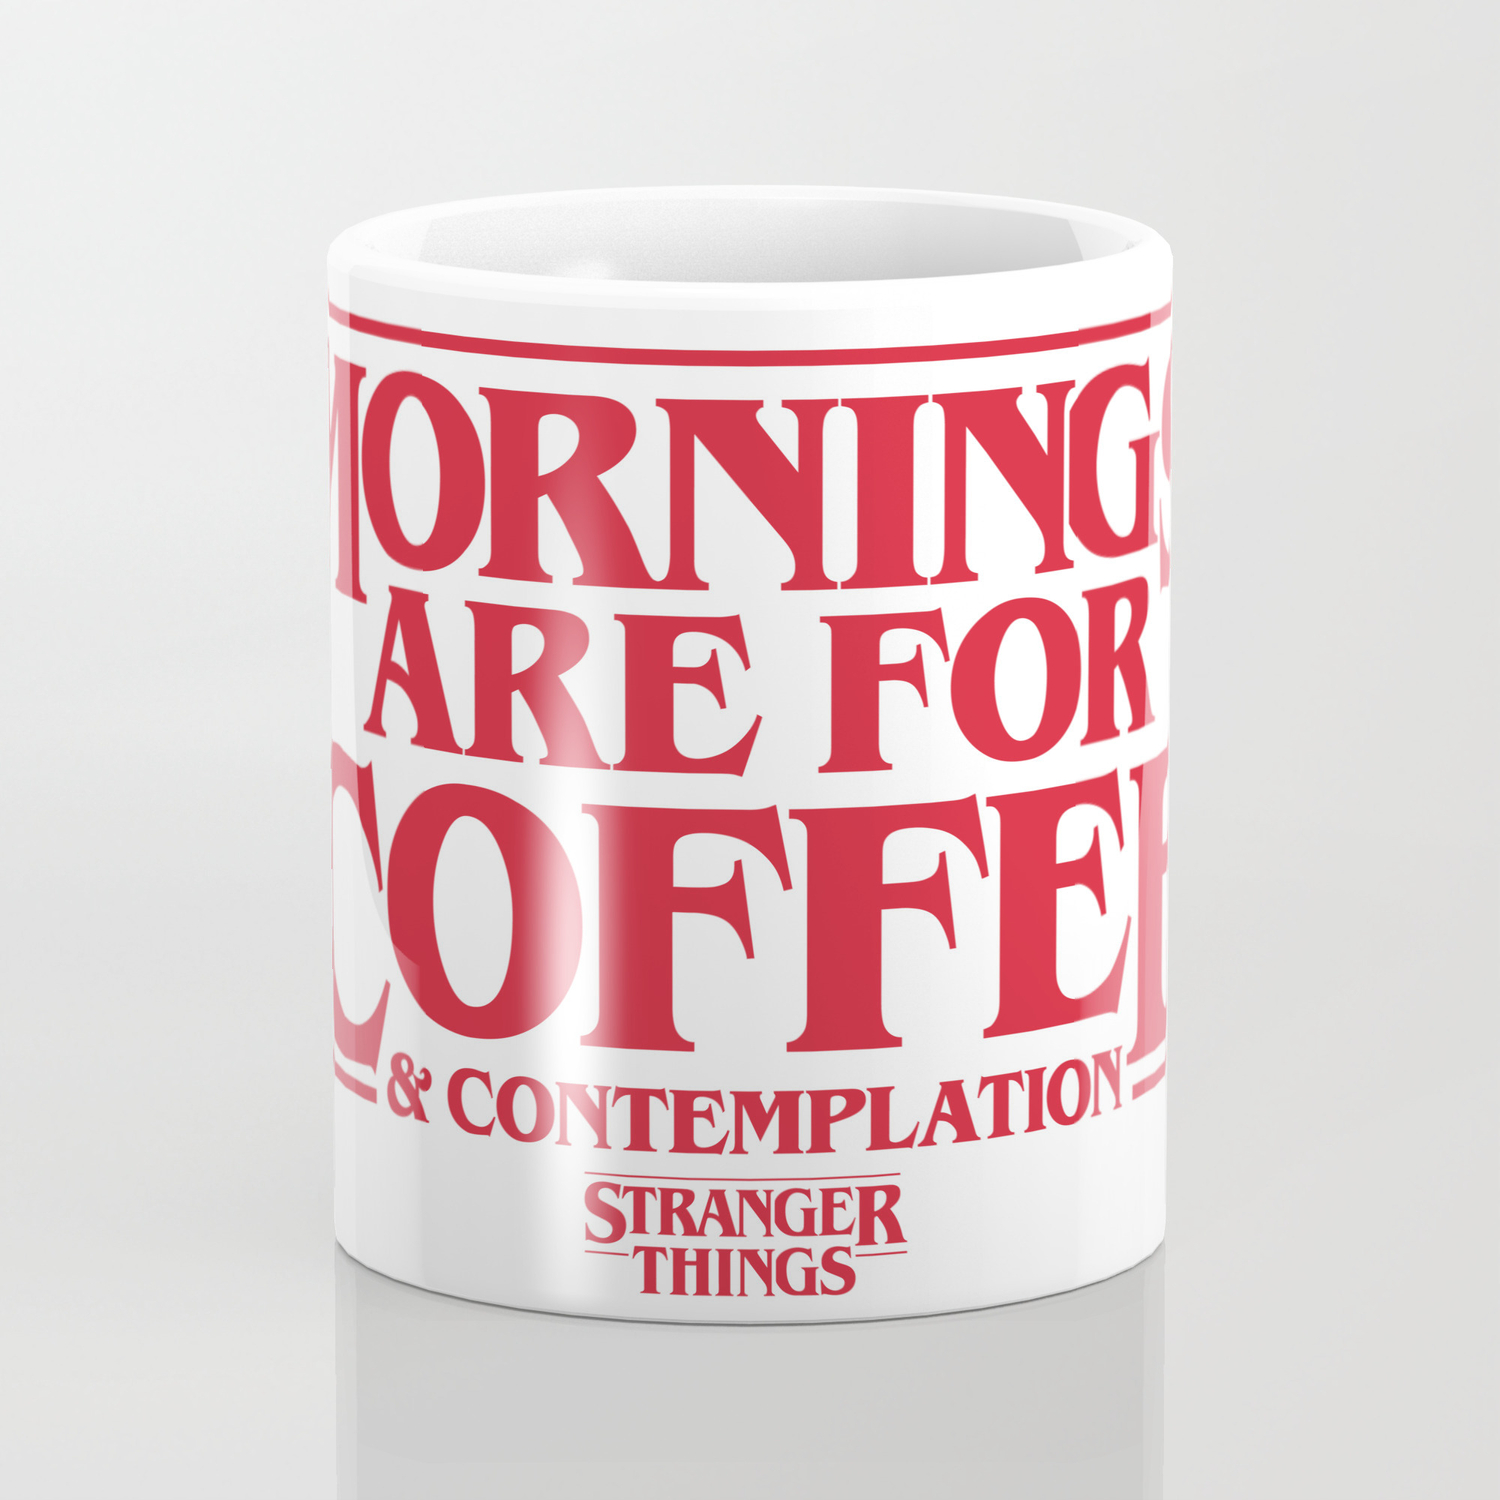 Stranger Things Coffee and Contemplation Travel Mug PM405